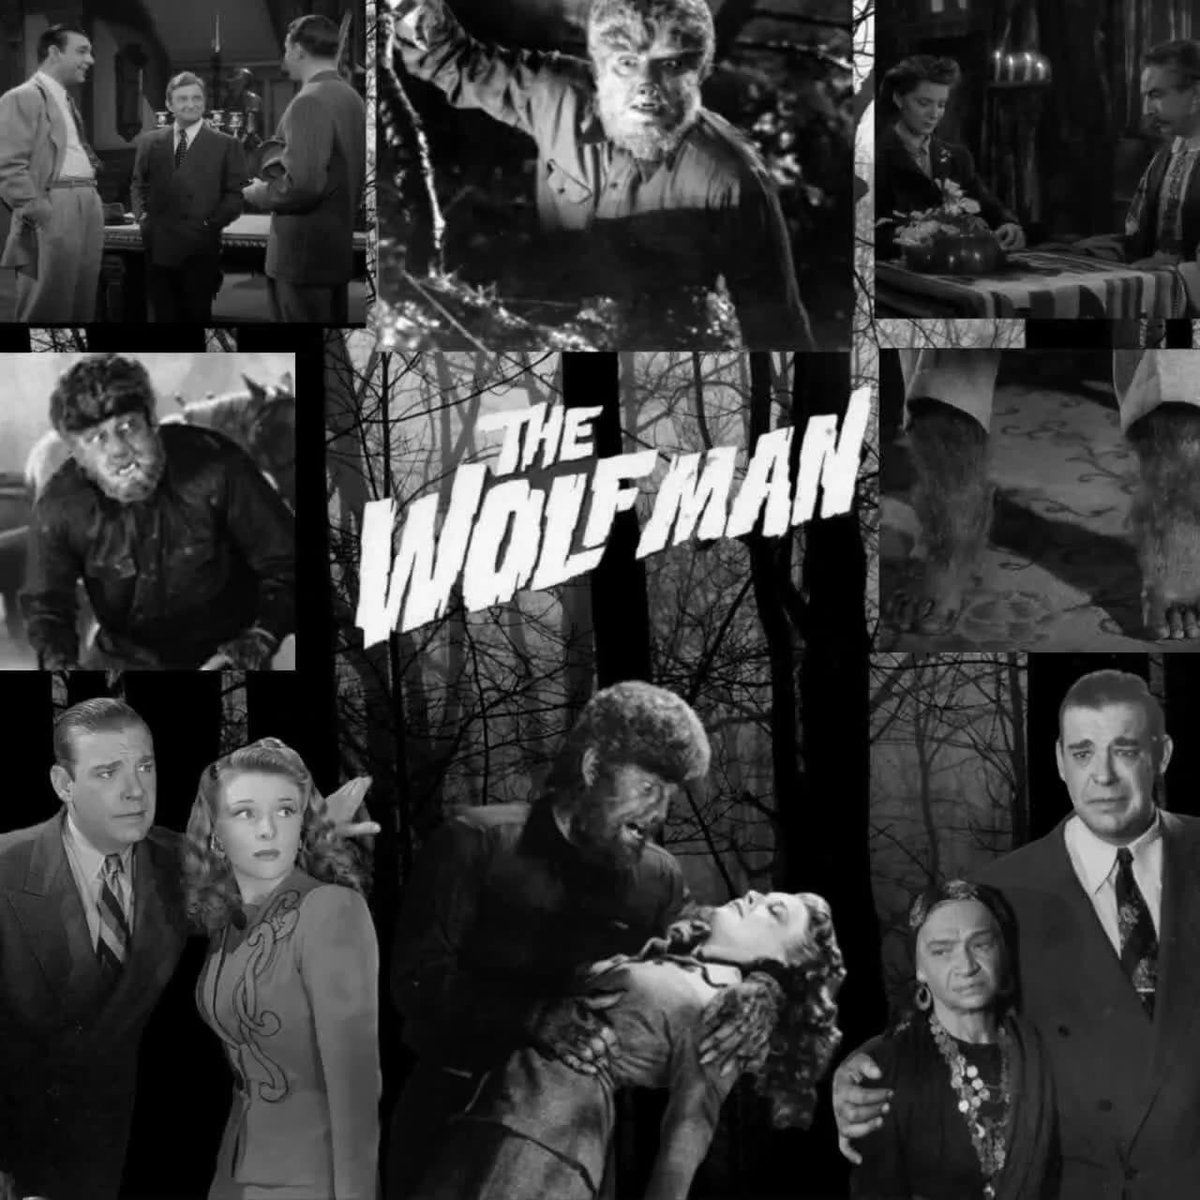 In 1941 Universal gave us the Wolfman